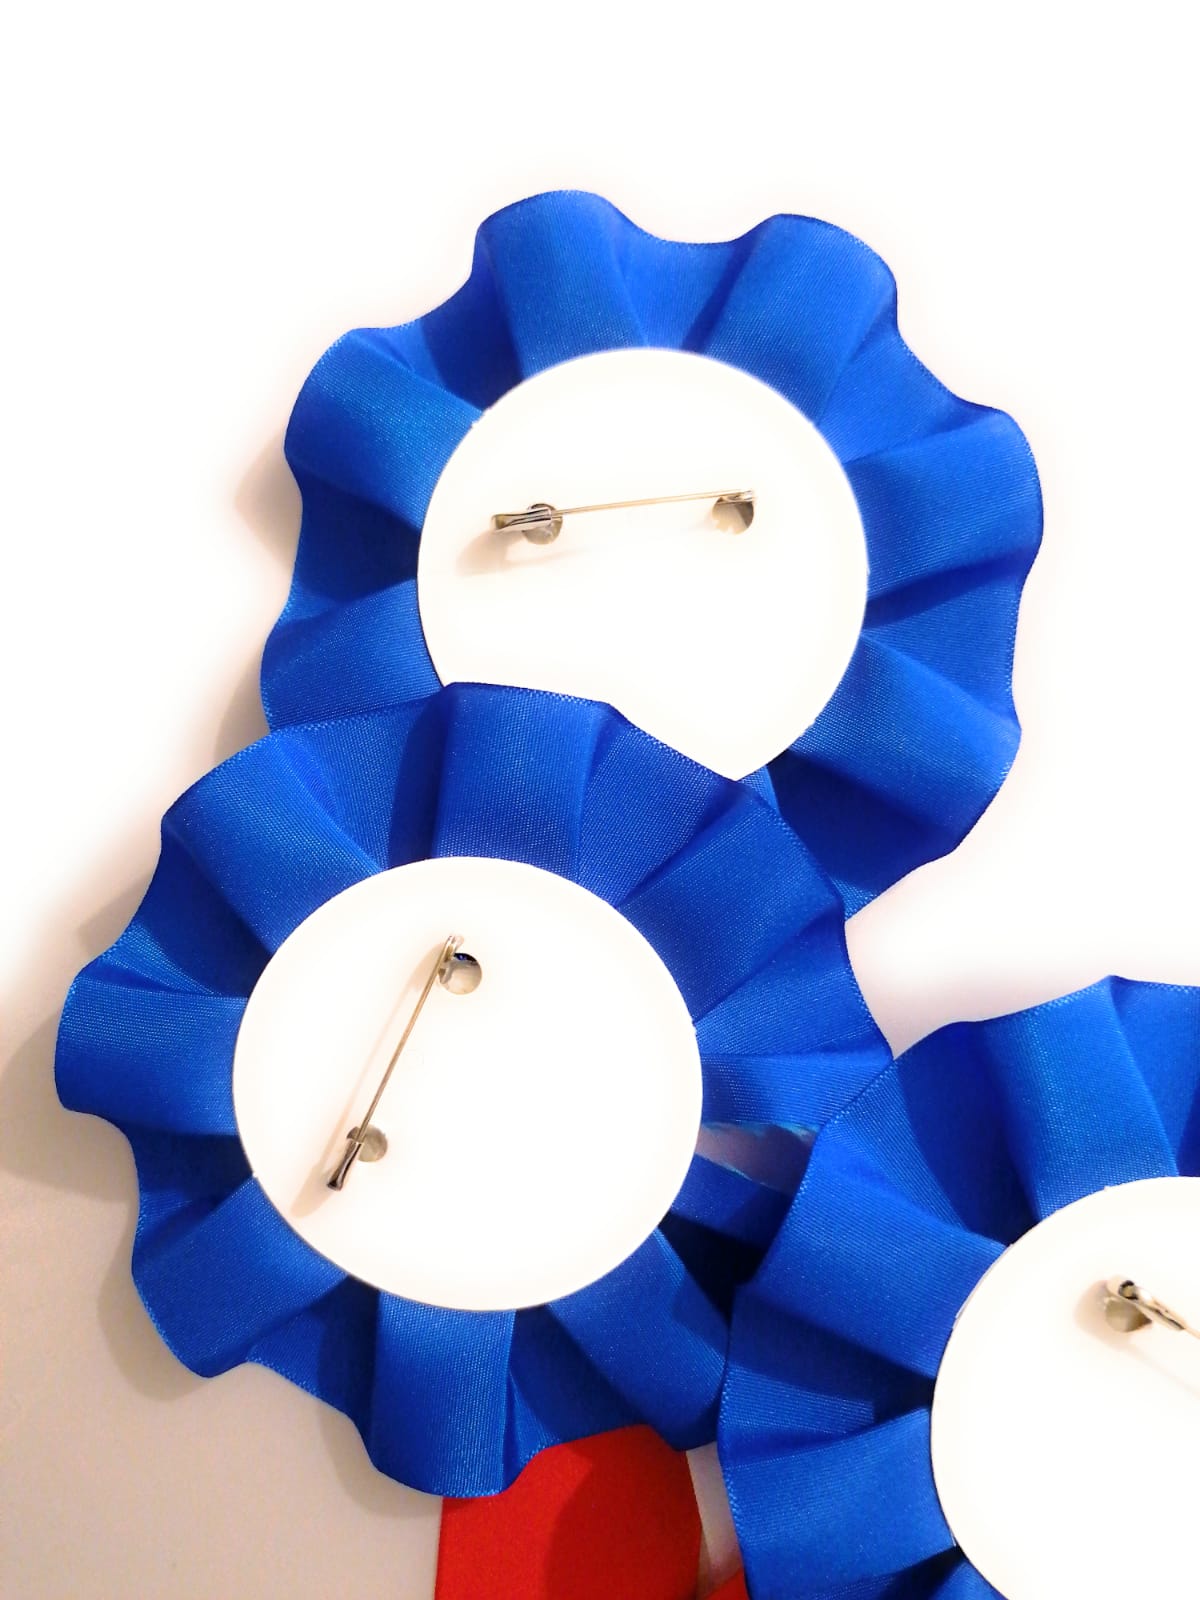 10 X 1 Tier Yellow and Blue Rosettes